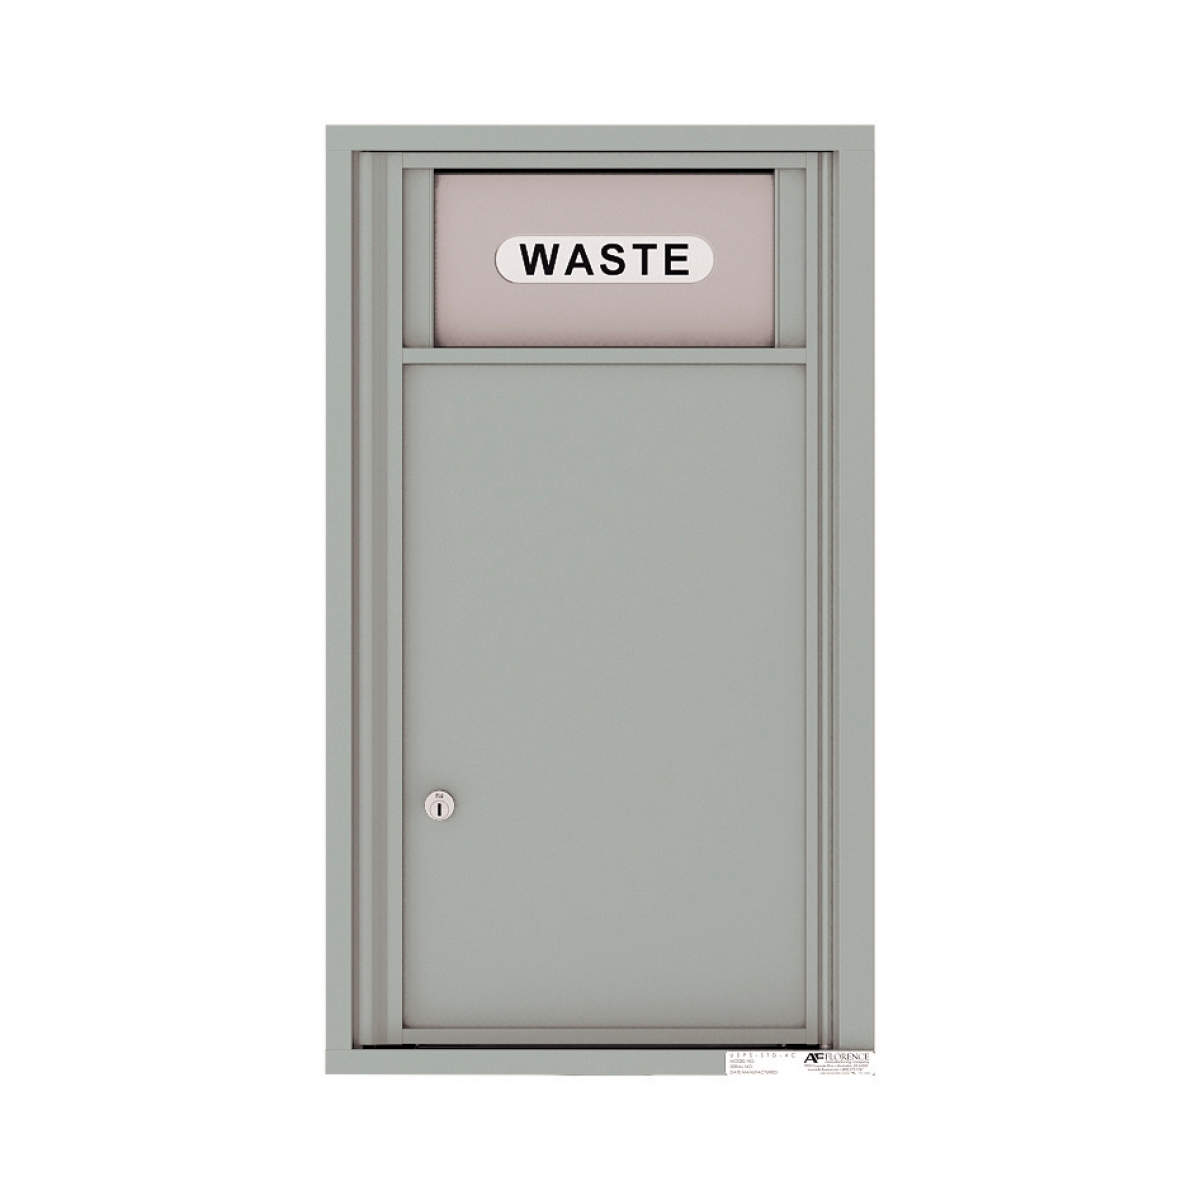 4C Mailboxes 4C09S-Bin Trash and Recycling Bin Product Image